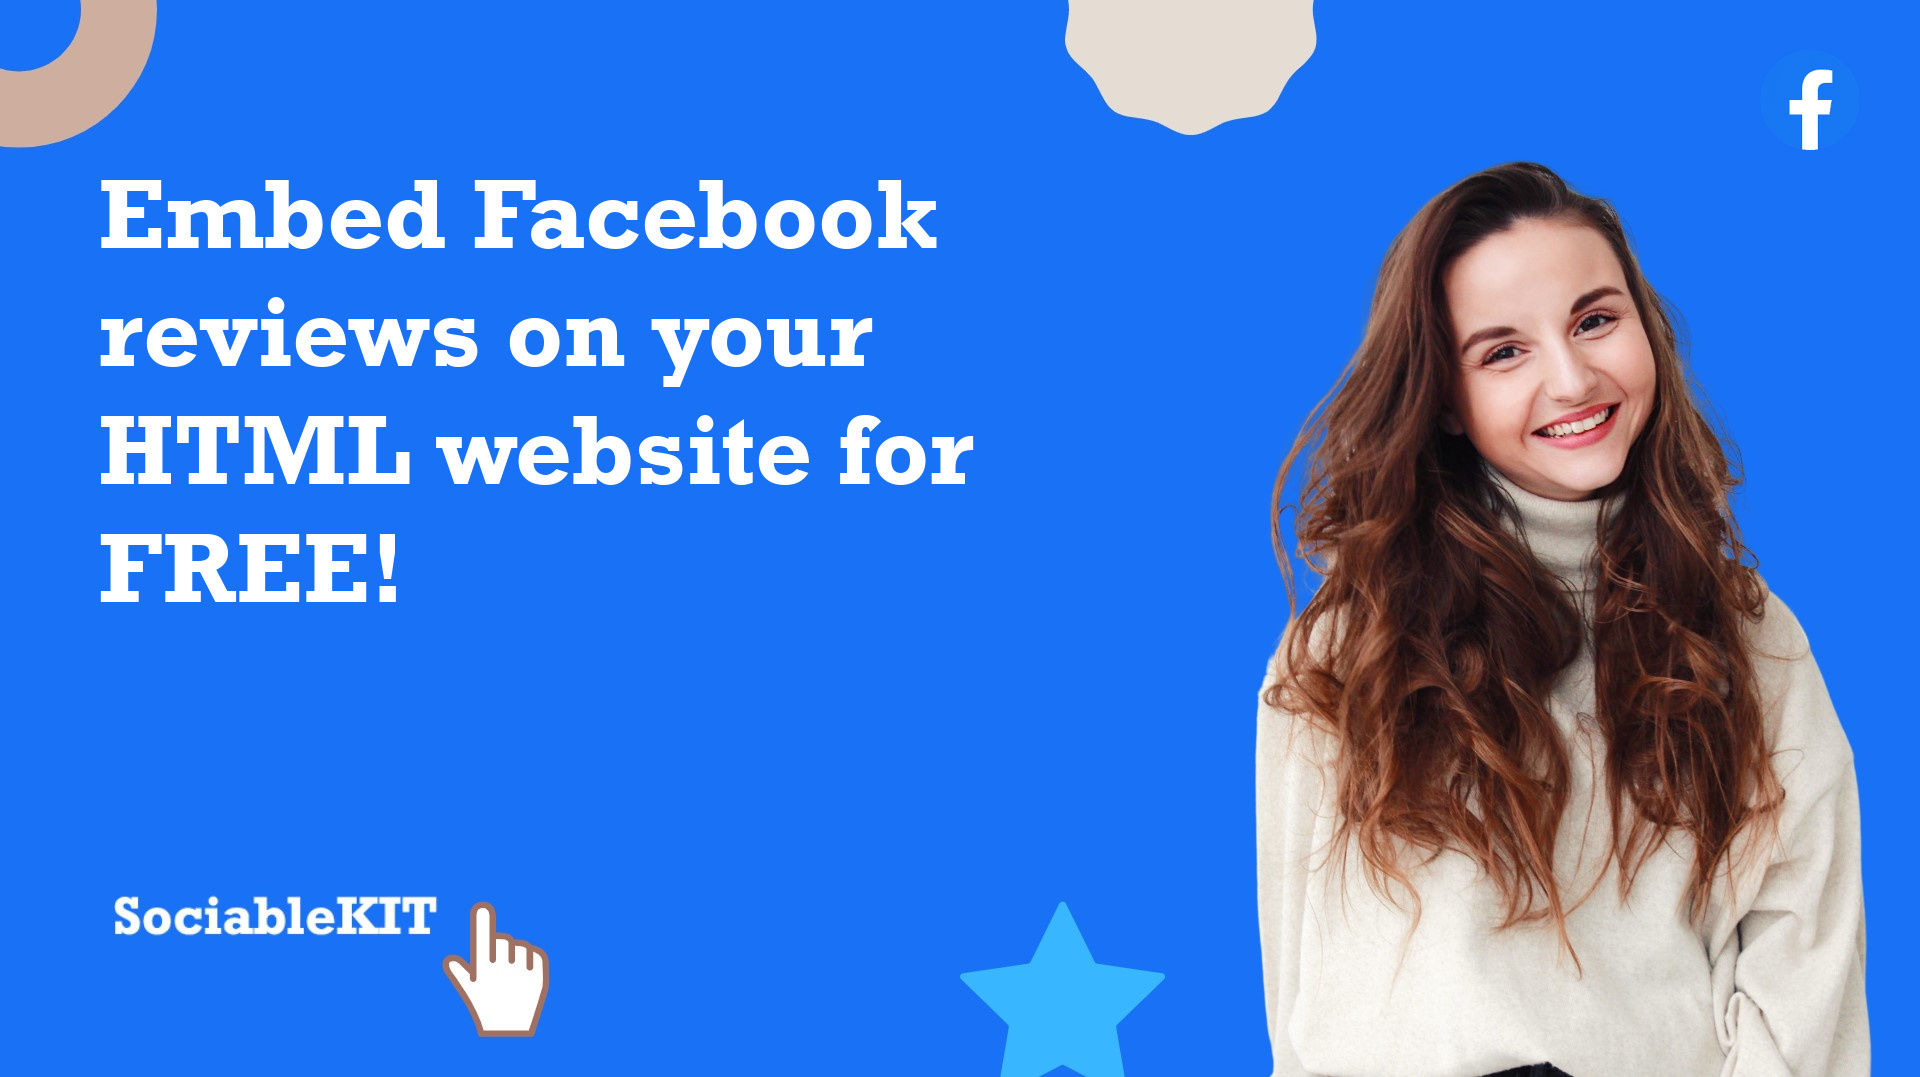 How to embed Facebook reviews on your HTML website for FREE?